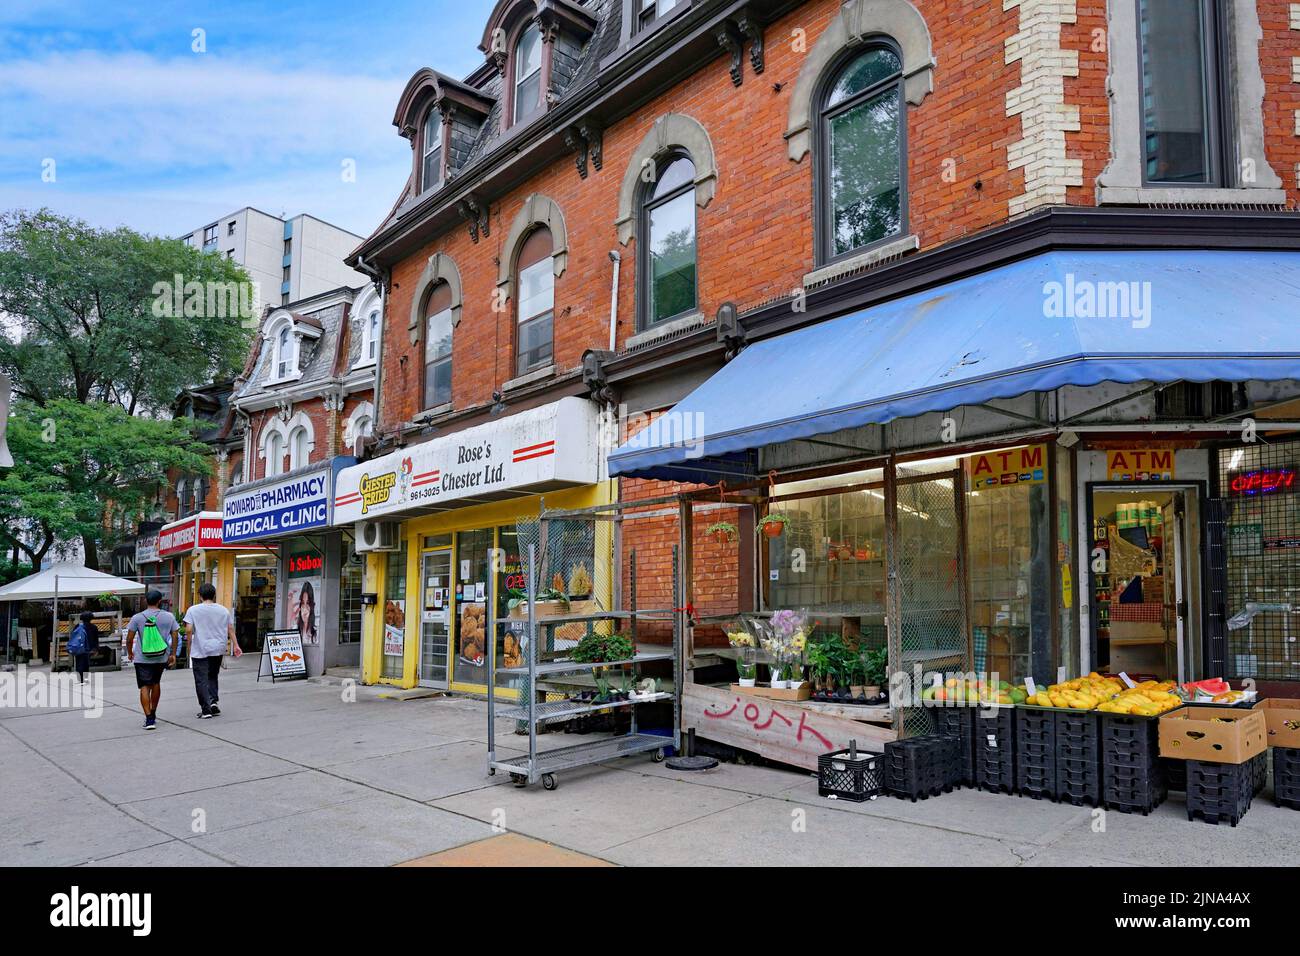 Toronto, Ontario, Canada - A row of stores and restaurants in the old Cabbagetown neighborhood with heritage architecture, preserved 19th century buil Stock Photo